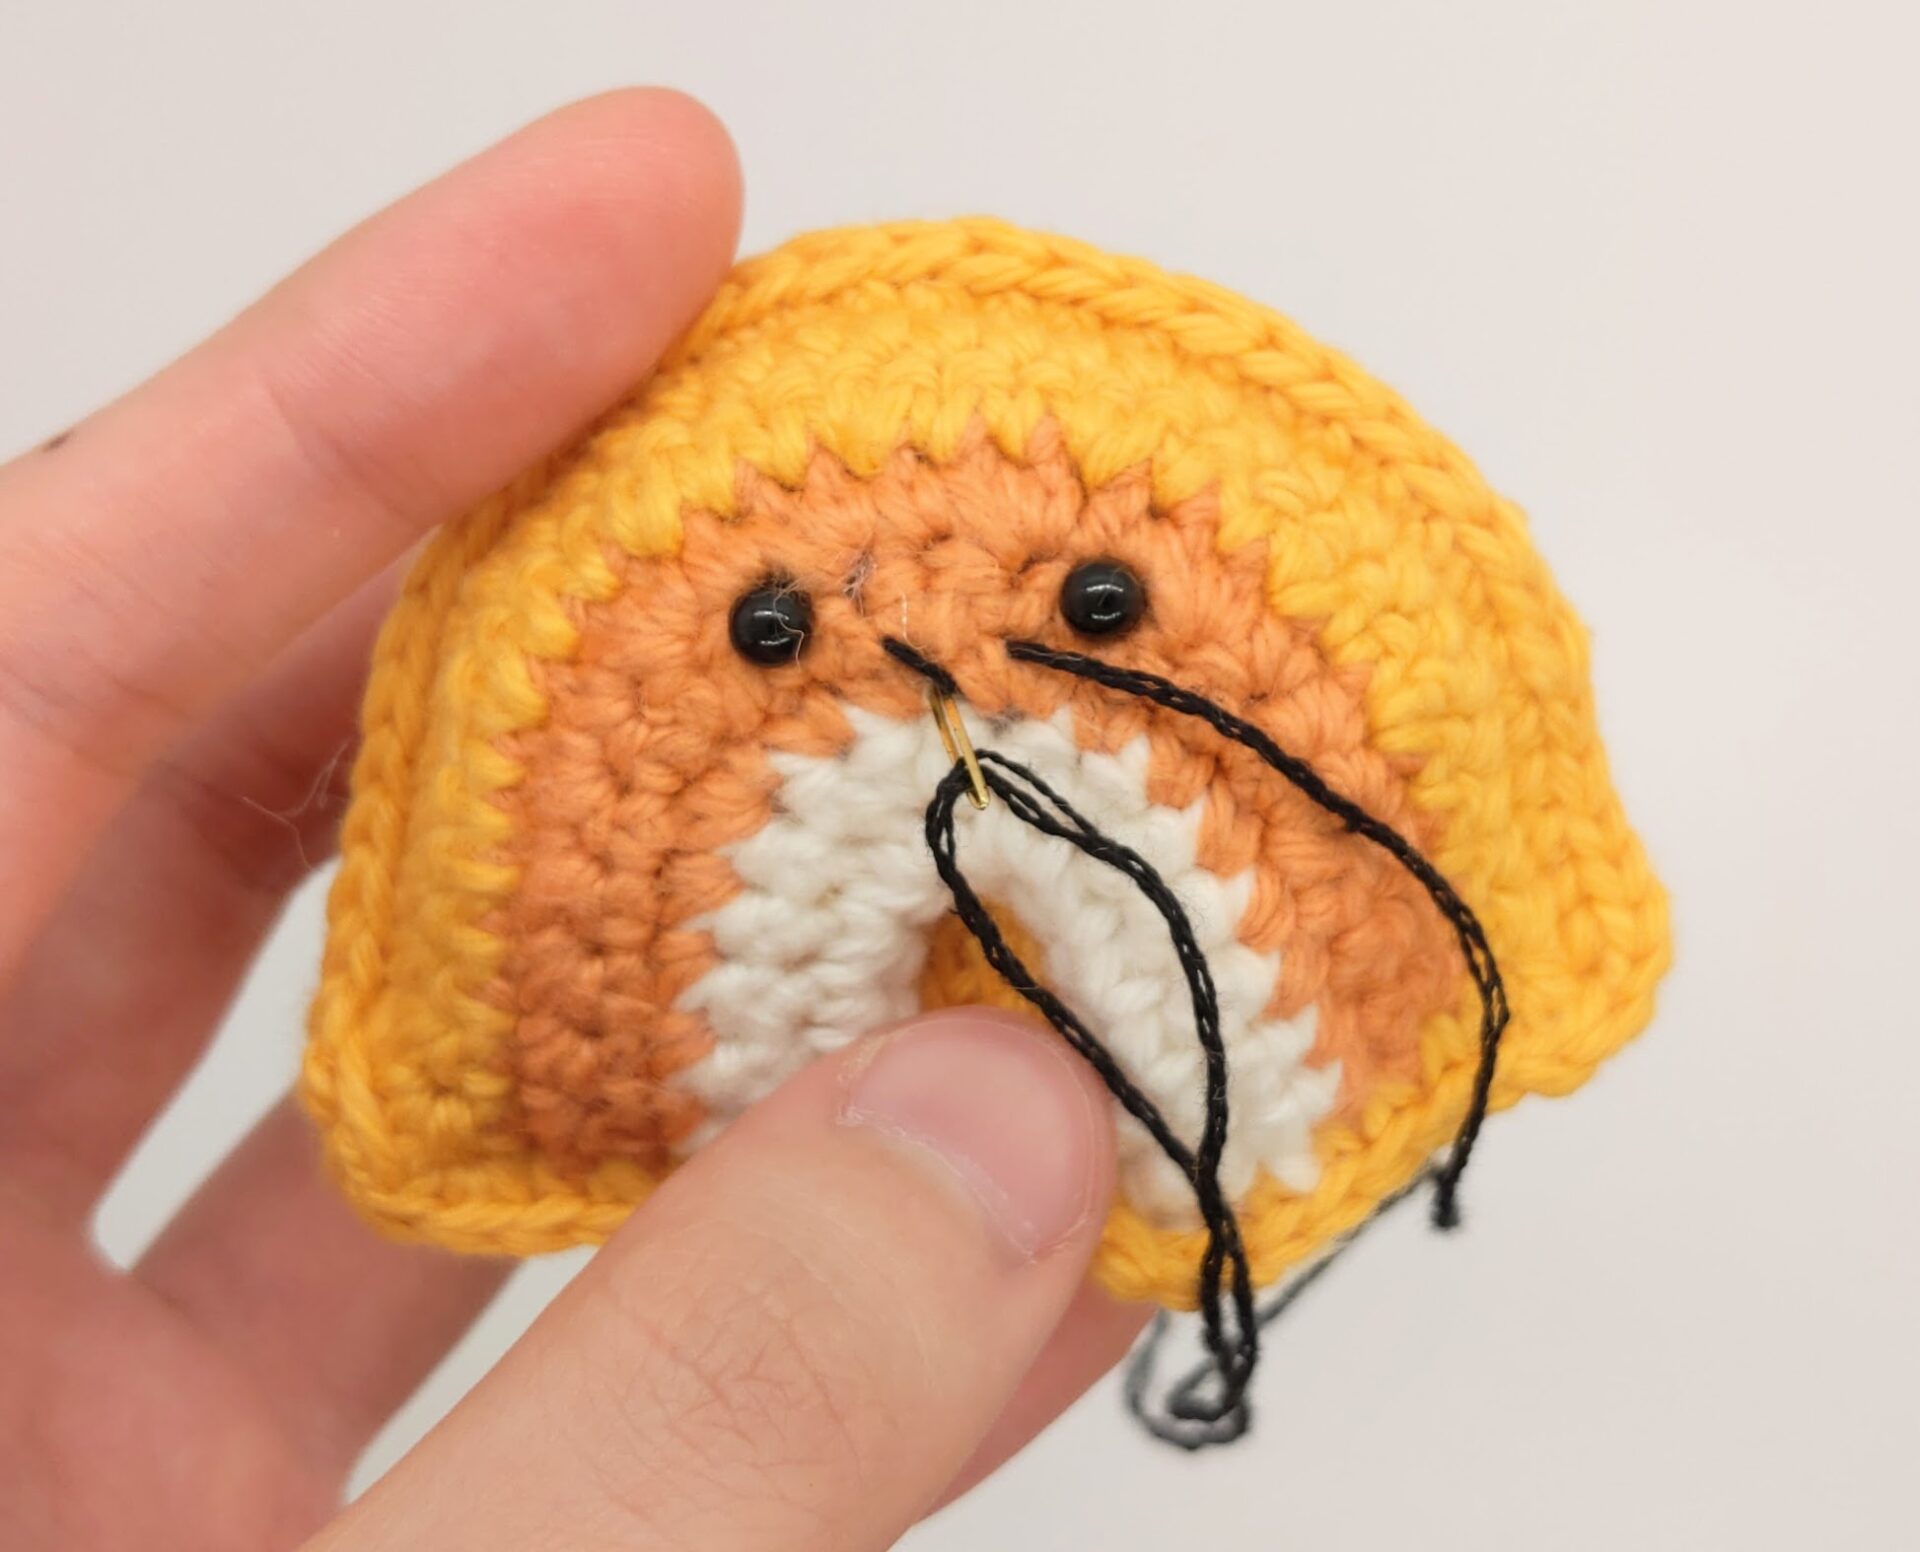 How to stitch a mouth to your amigurumi